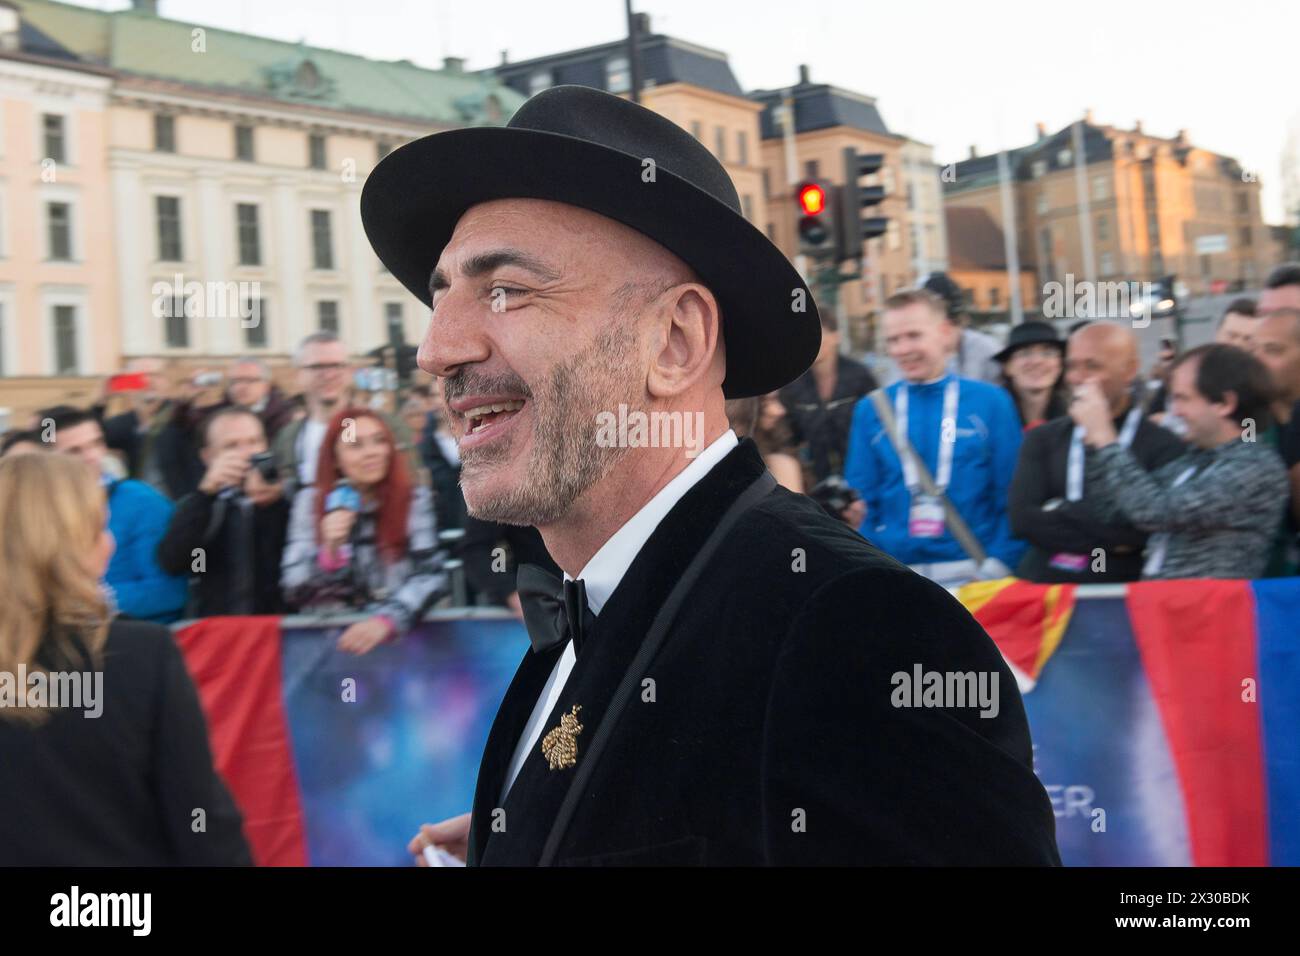 Eurovision Song Contest 2016, Stockholm, Sweden Stockholm, Sweden. 8 May. Singer Serhat from San Marino on the red carpet for the ESC 2016. Stockholm Euroclub Sweden *** Eurovision Song Contest 2016, Stockholm, Sweden Stockholm, Sweden 8 May Singer Serhat from San Marino on the red carpet for the ESC 2016 Stockholm Euroclub Sweden Stock Photo